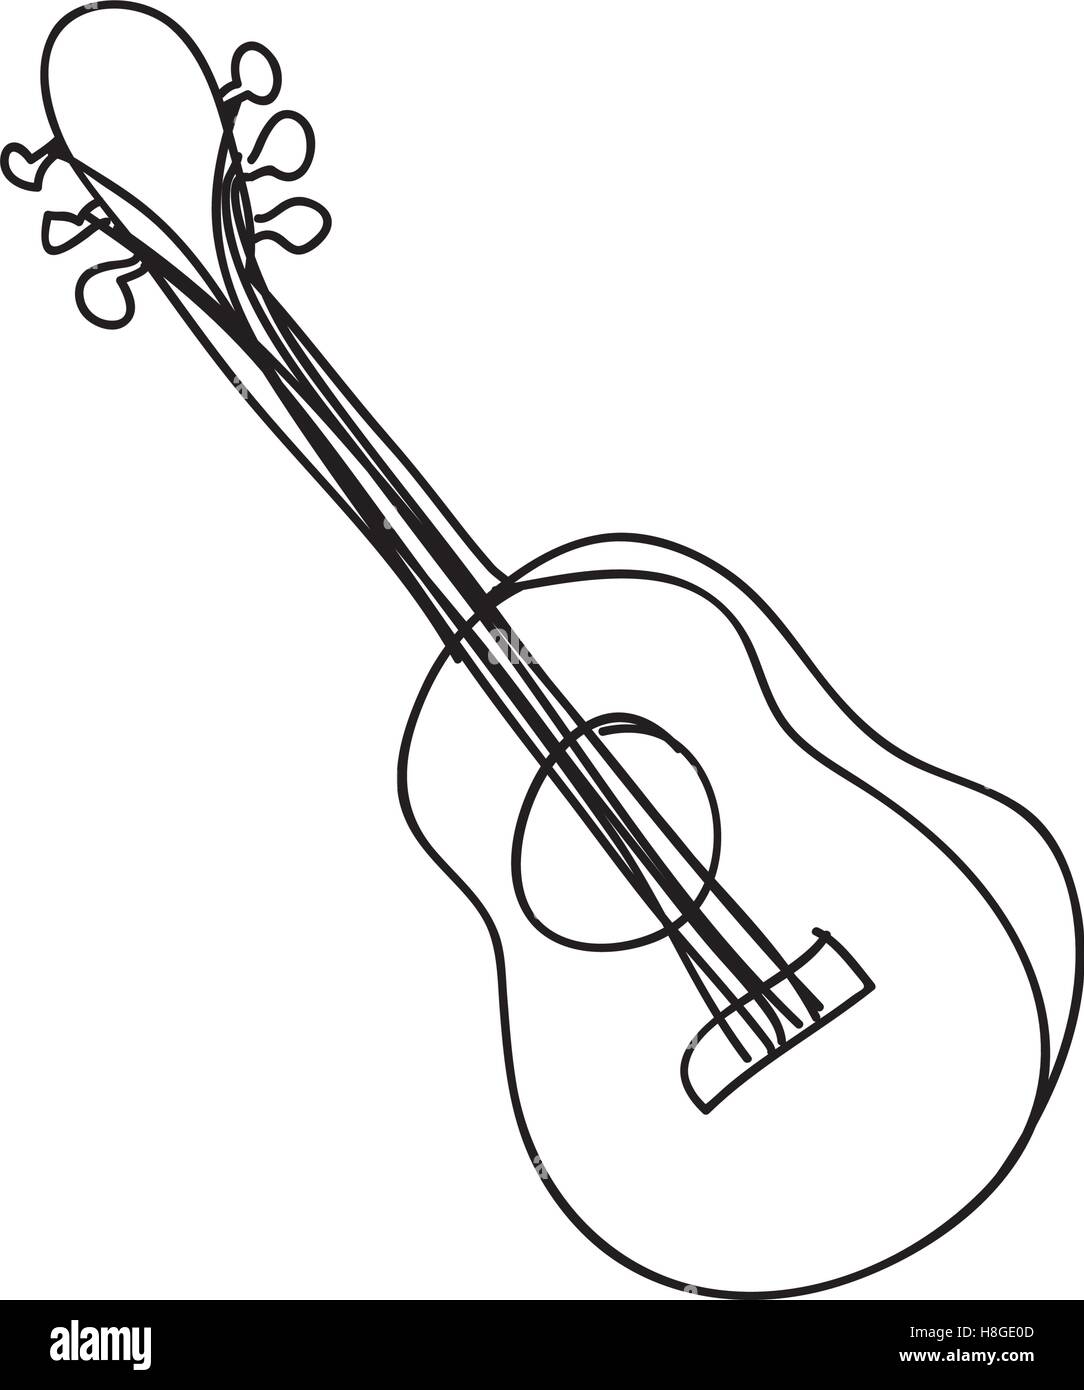 acoustic guitar instrument icon image vector illustration design Stock Vector